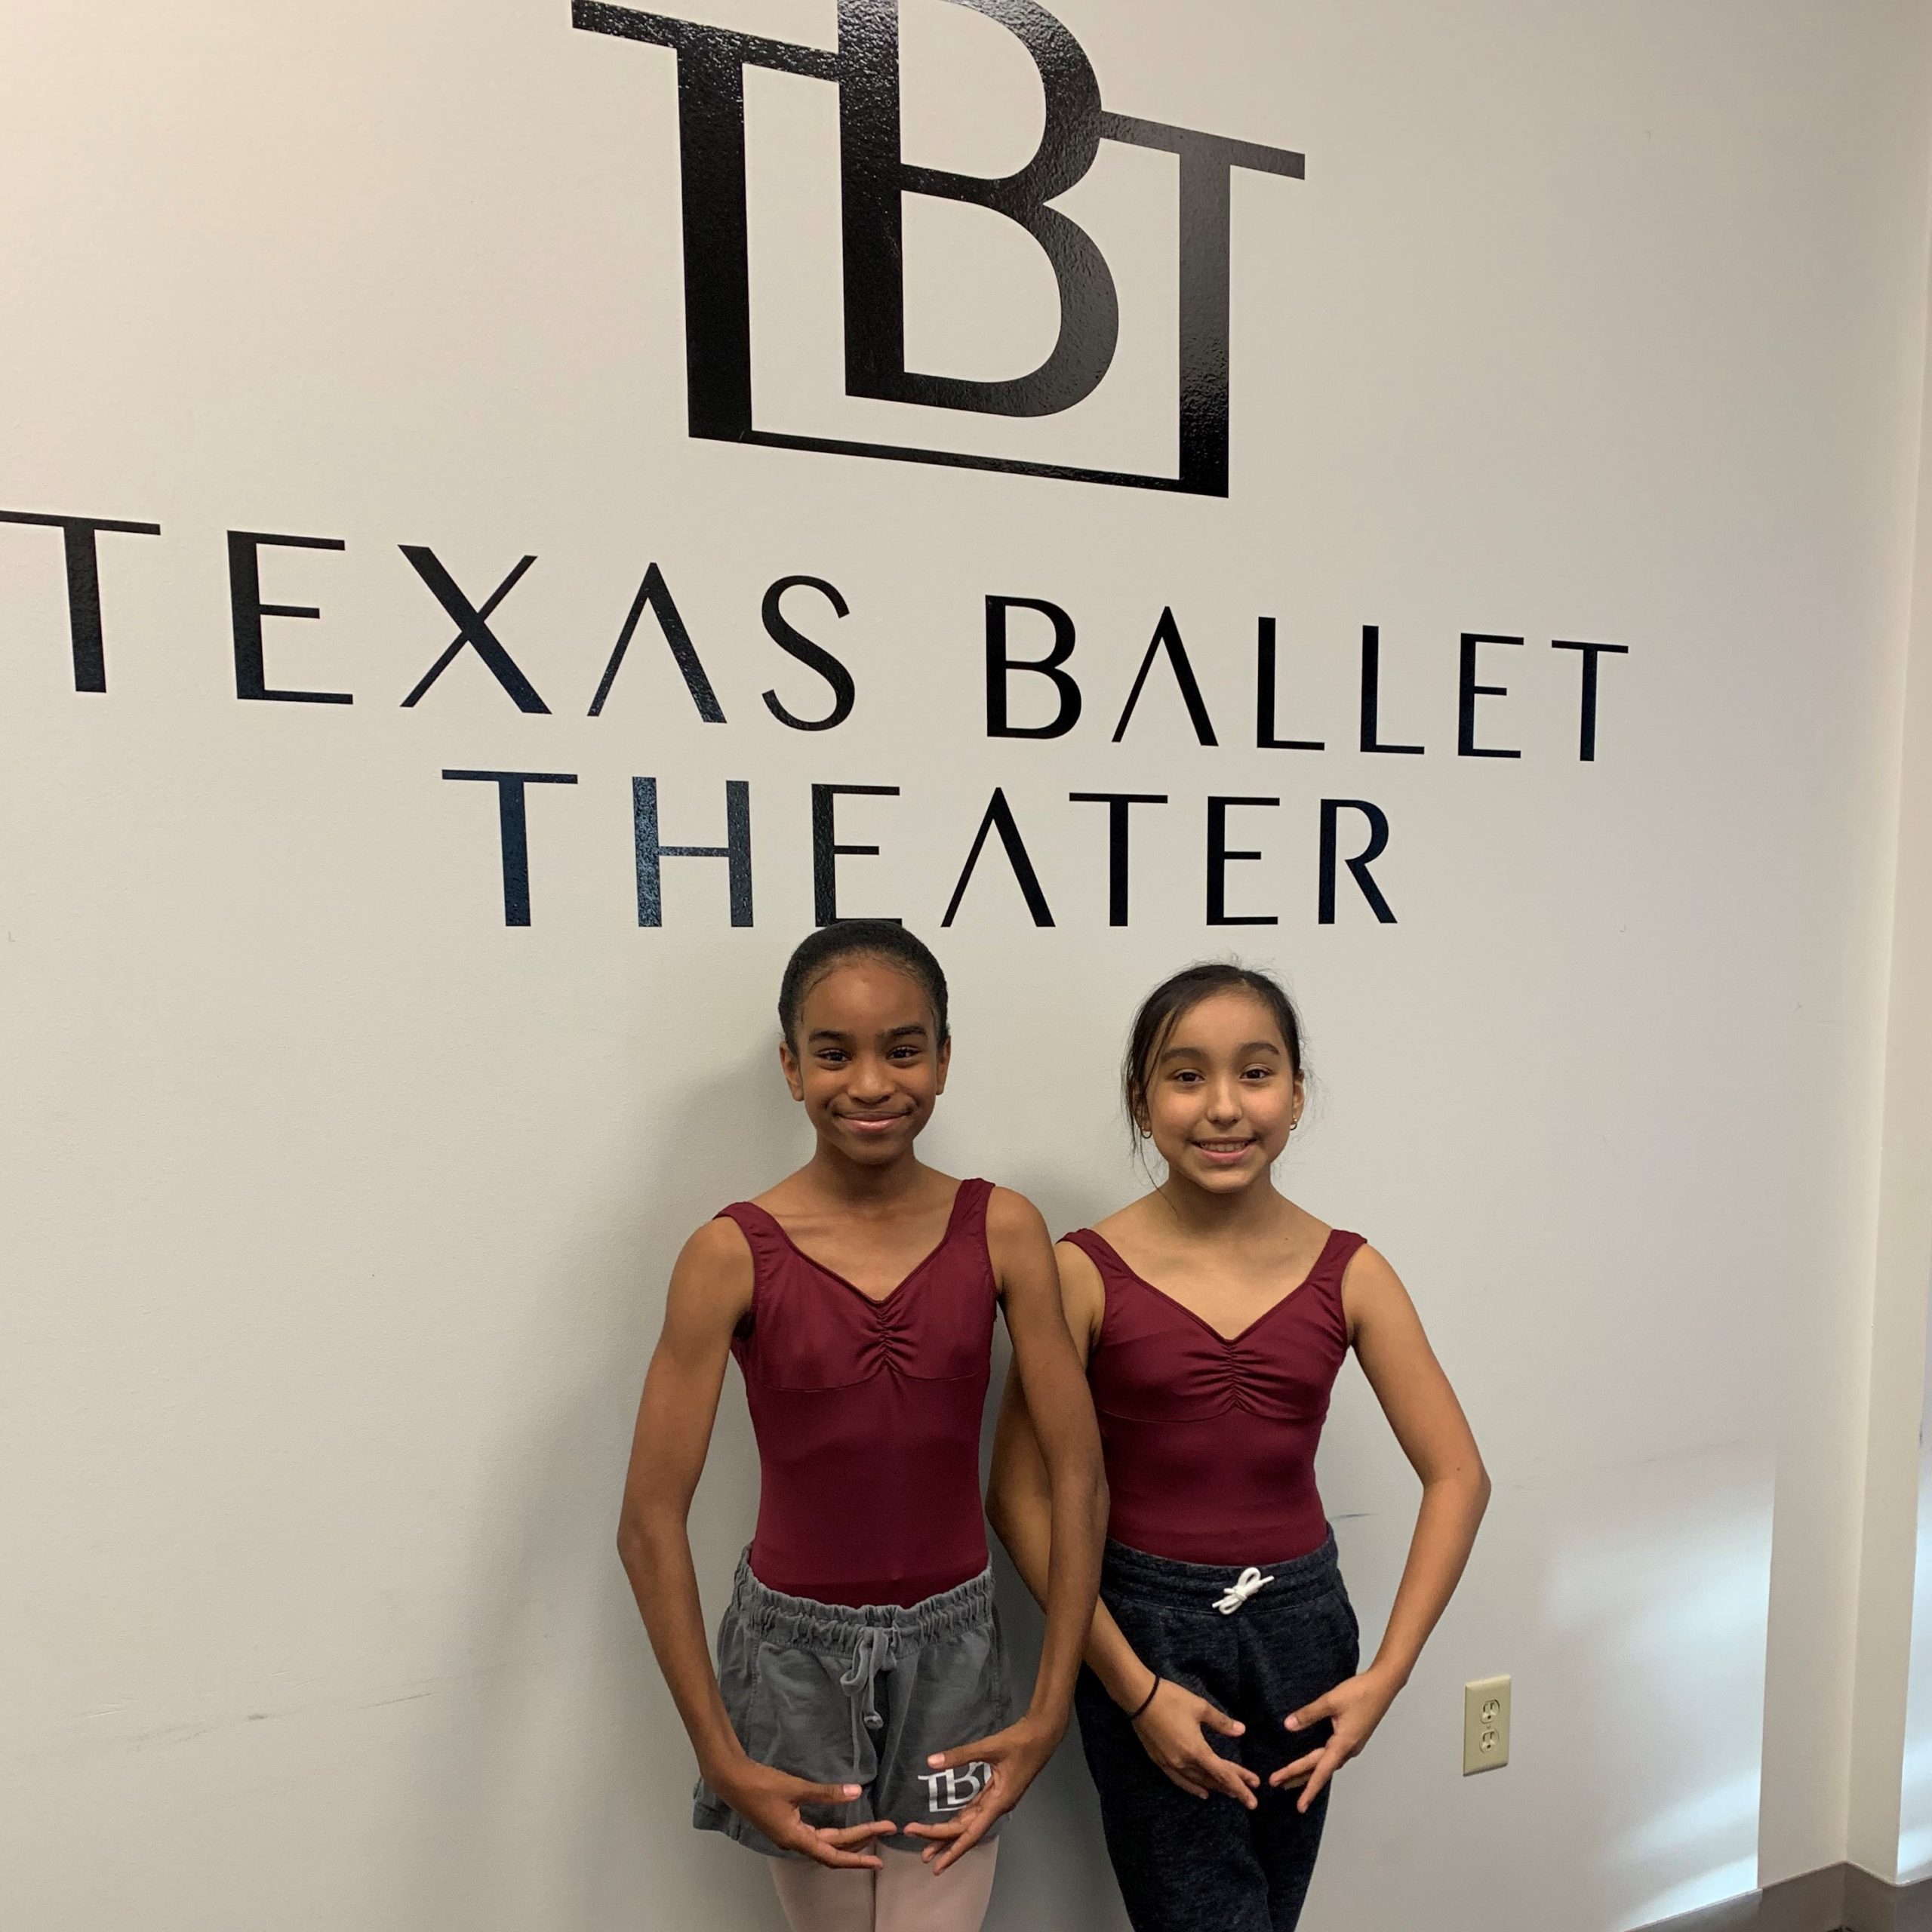 Two young female dancers posed in front of the Texas Ballet Theater logo